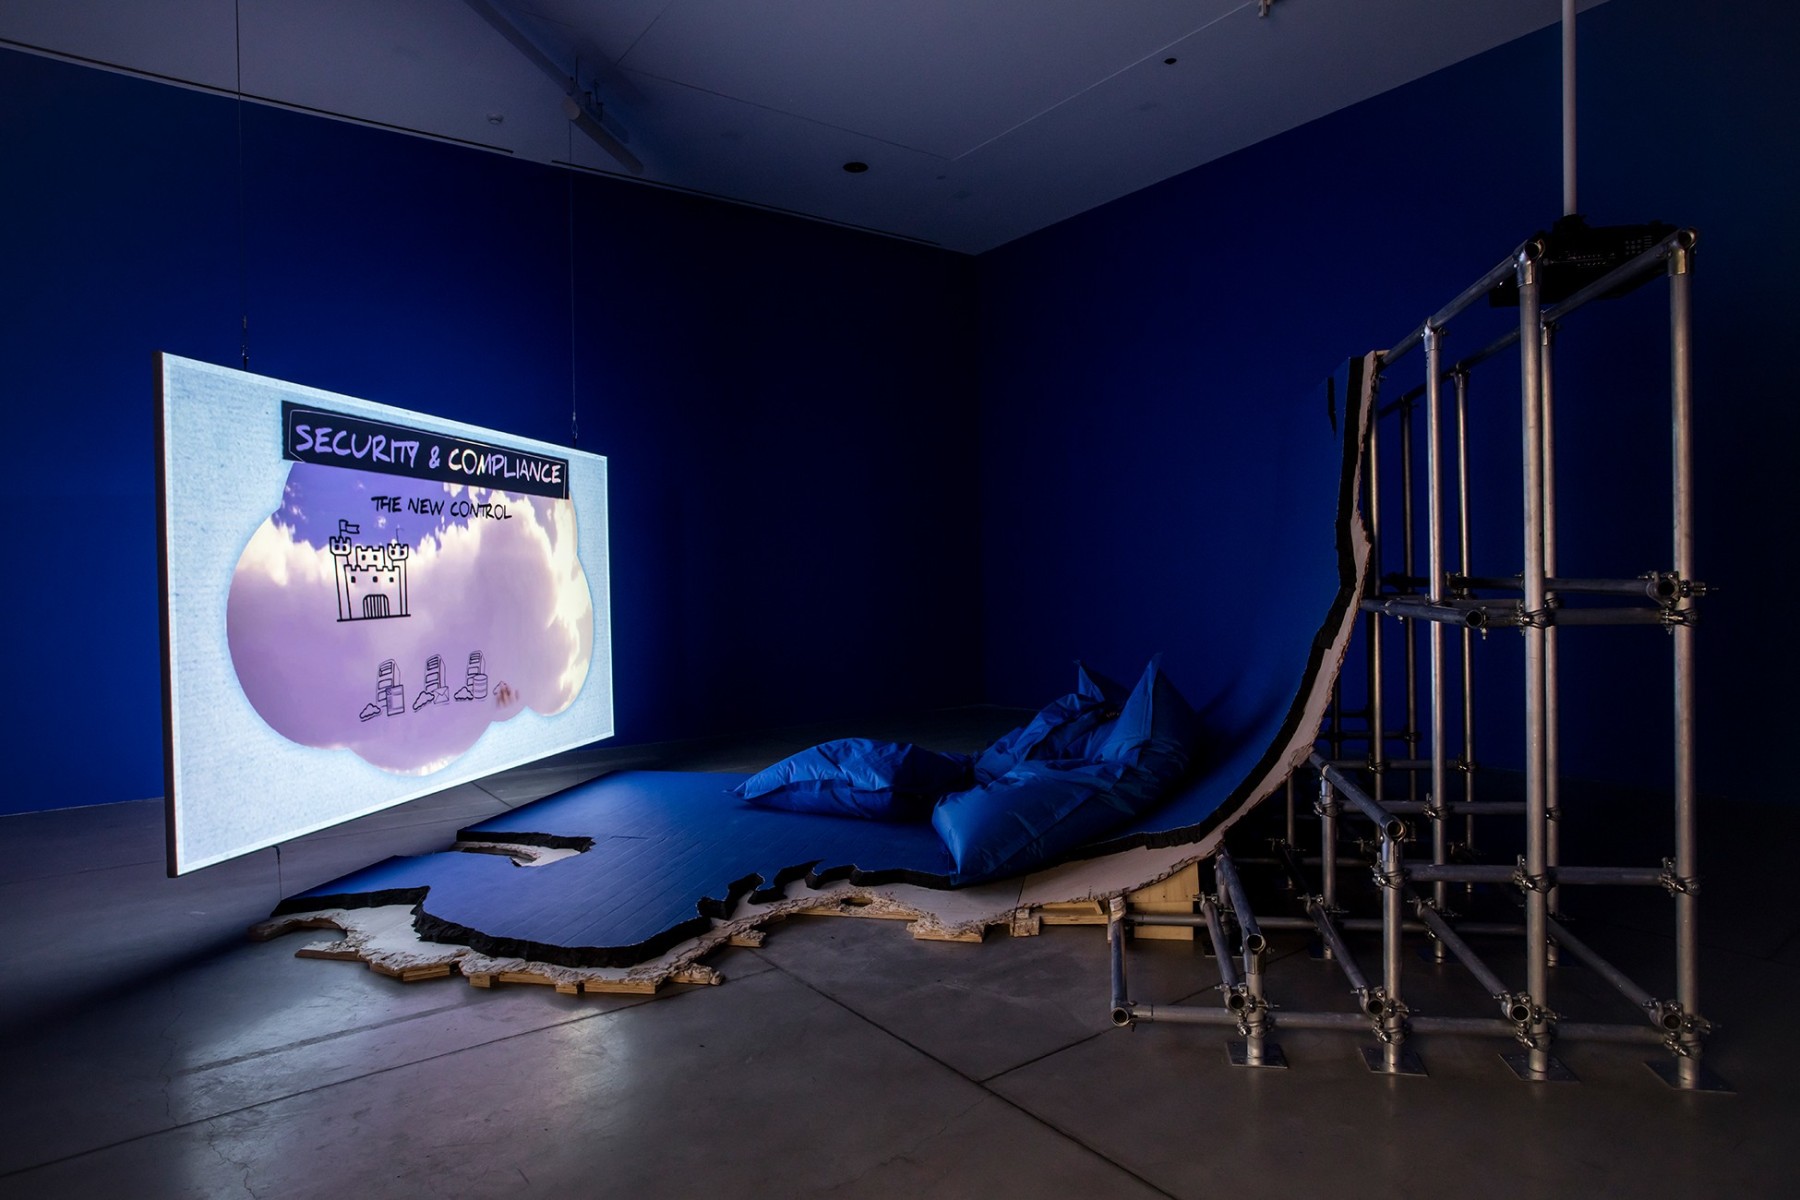 Hito Steyerl, Hito Steyerl:&nbsp;This is the future, October 24, 2019 - February 23, 2020,&nbsp;Art Gallery of Ontario, Canada